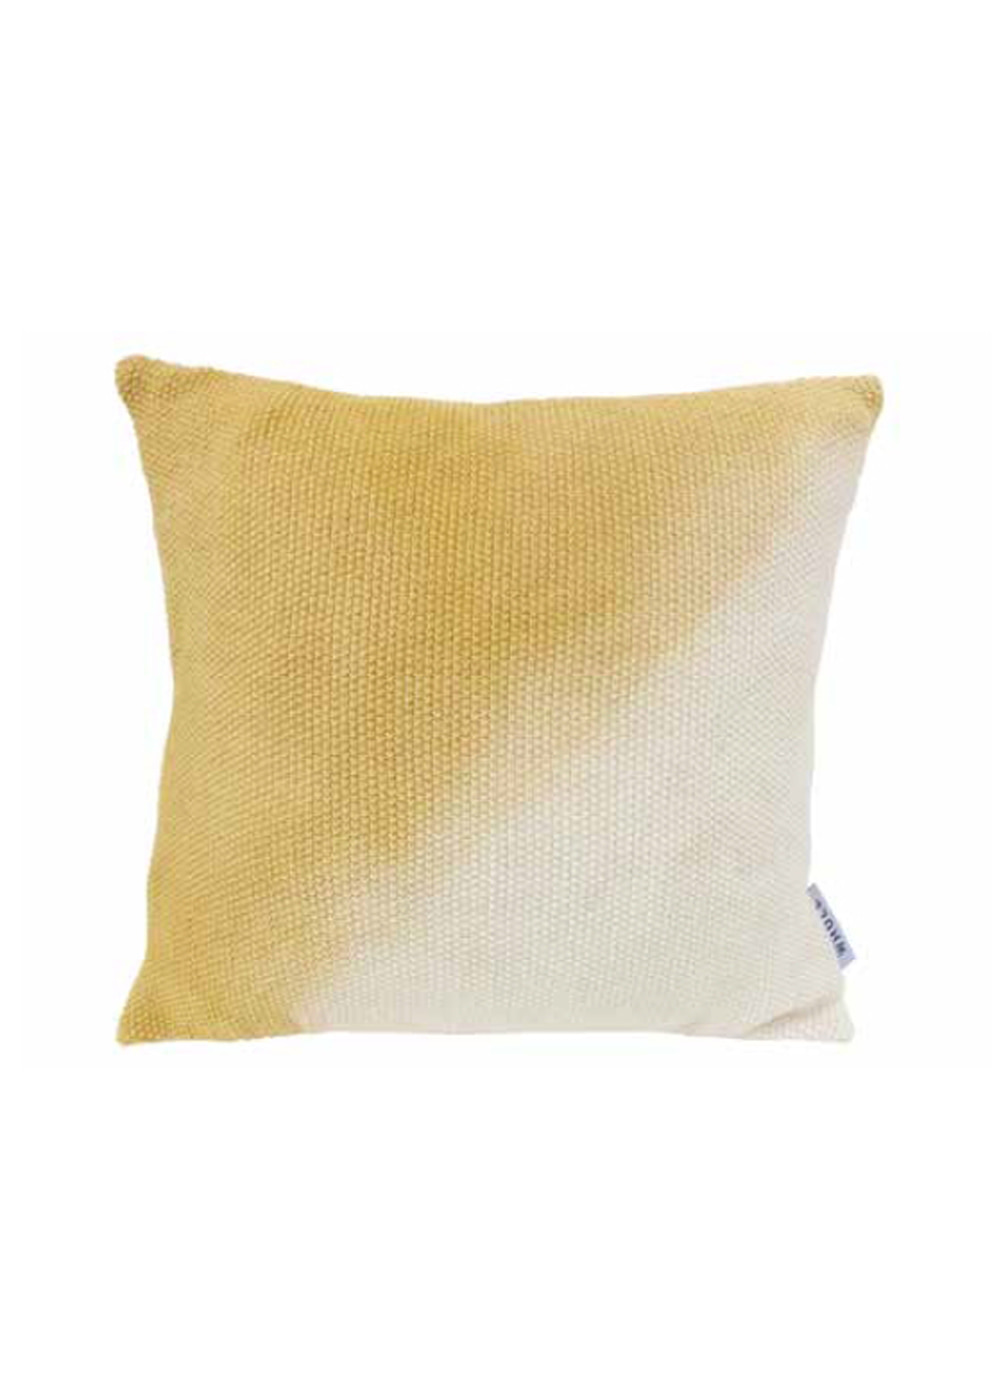 Wilo Cushion Cover - 2 colors